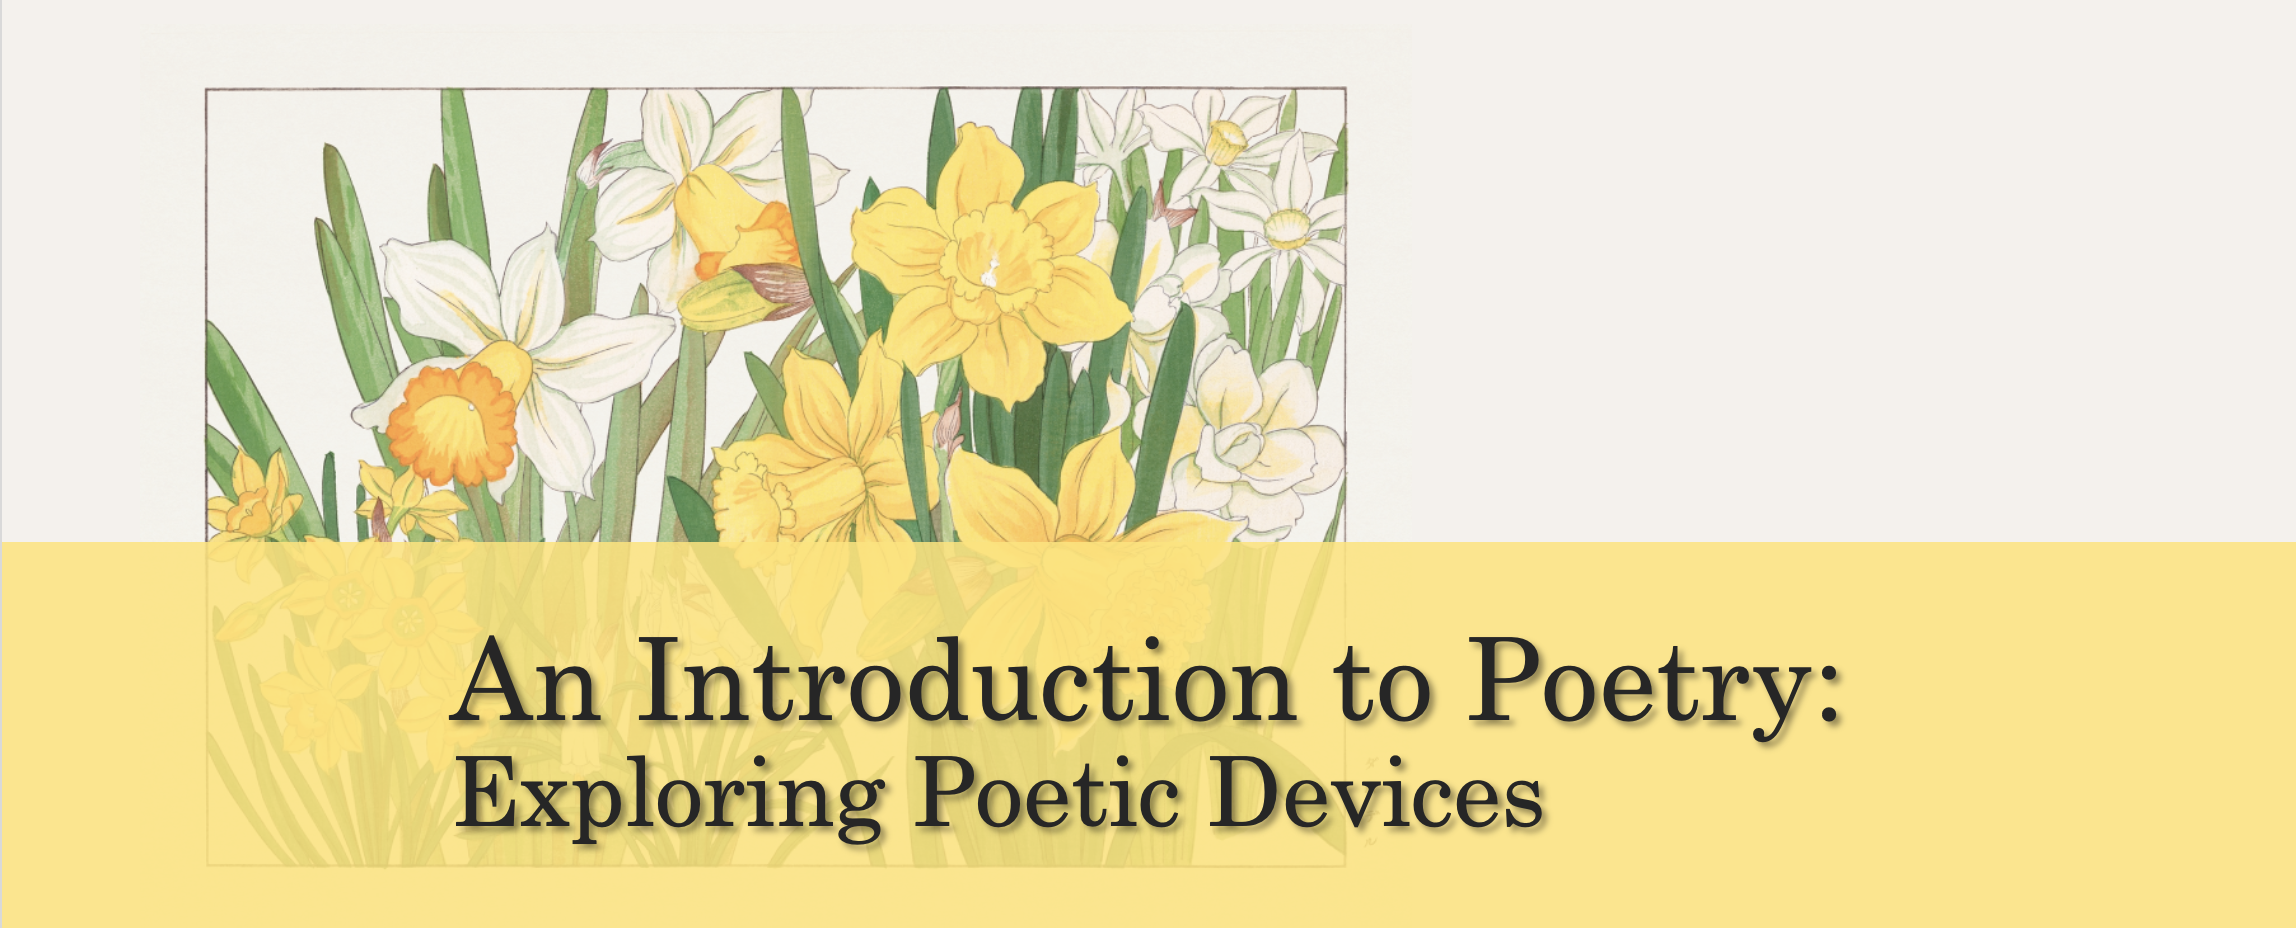 An Introduction to Poetry: Exploring Poetic Devices